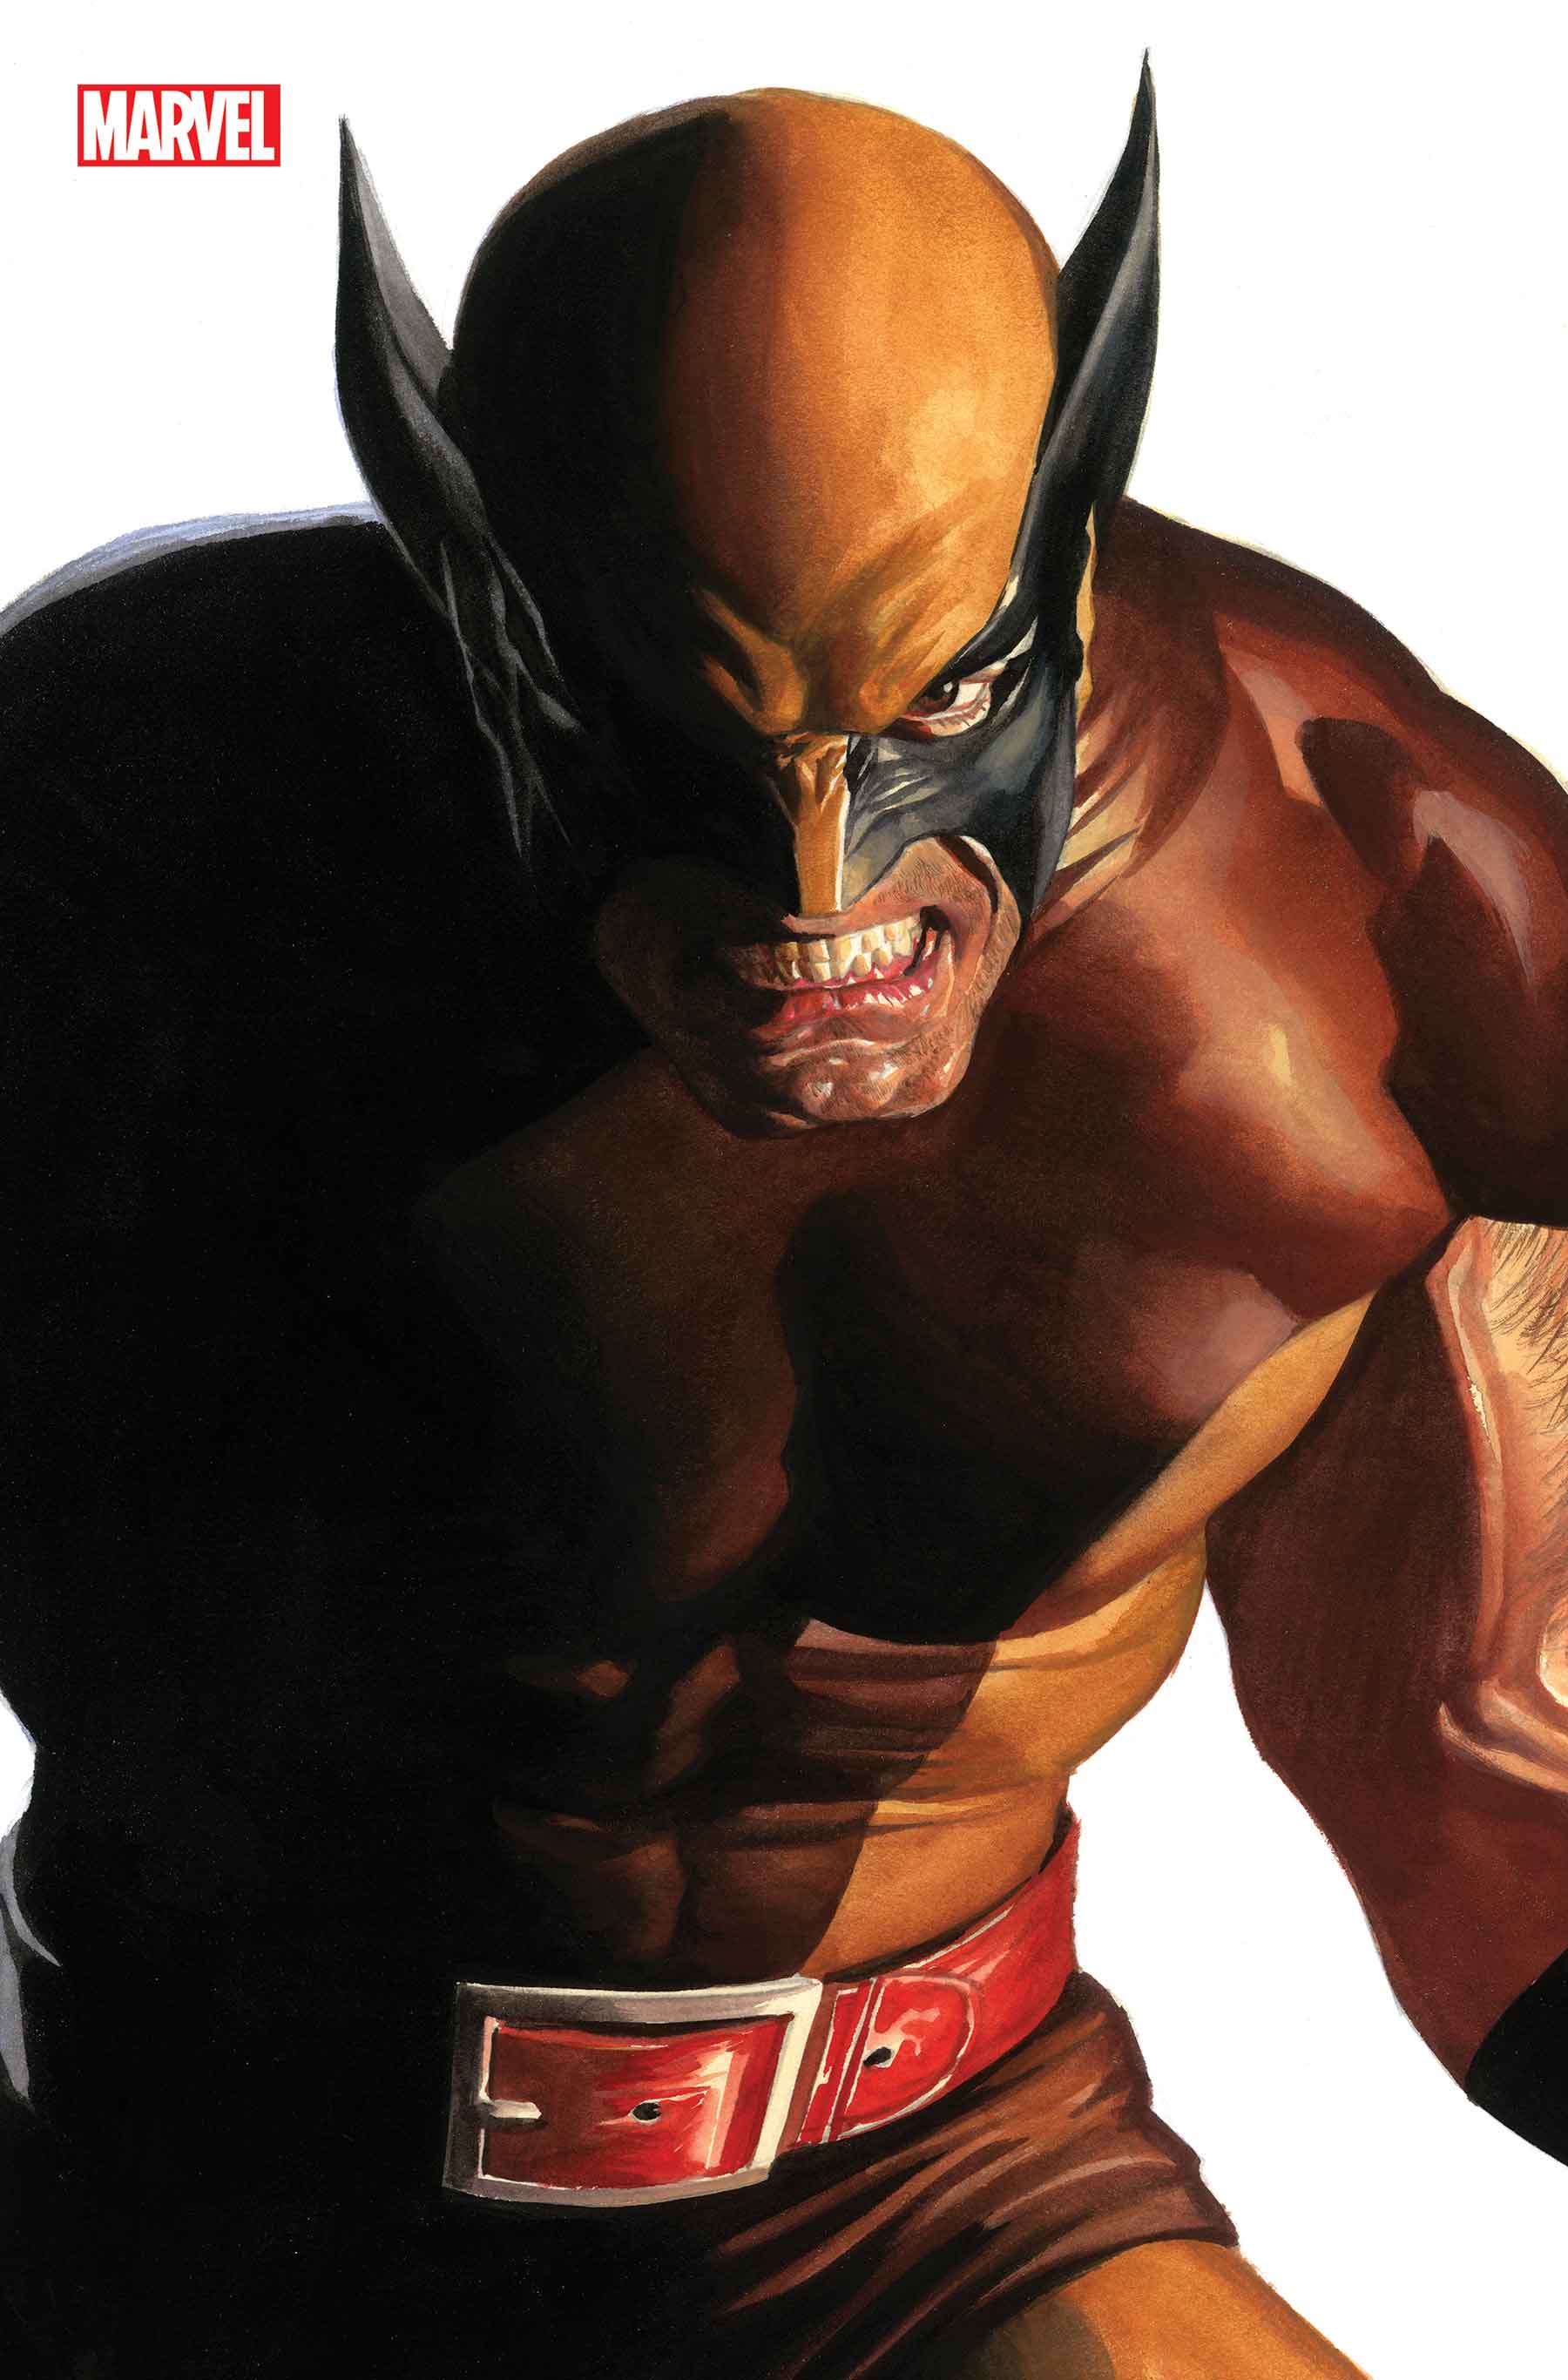 MORE ALEX ROSS TIMELESS VARIANT COVERS COMING IN OCTOBER